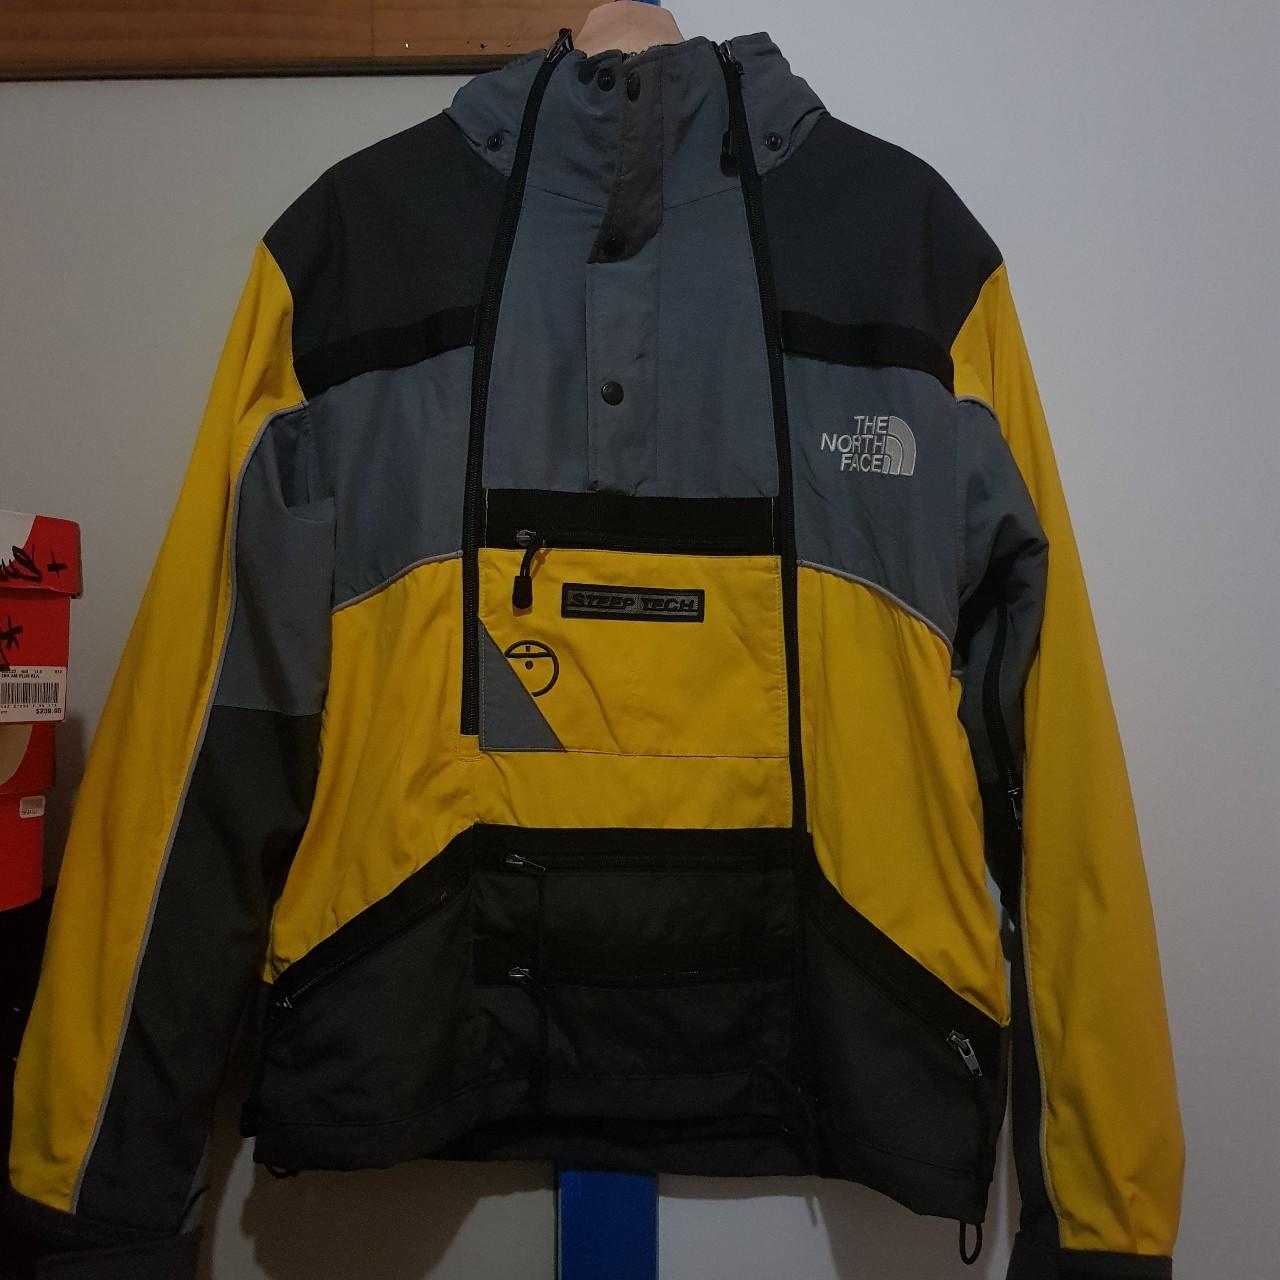 1991 Vintage north face steep tech jacket. The one... - Depop